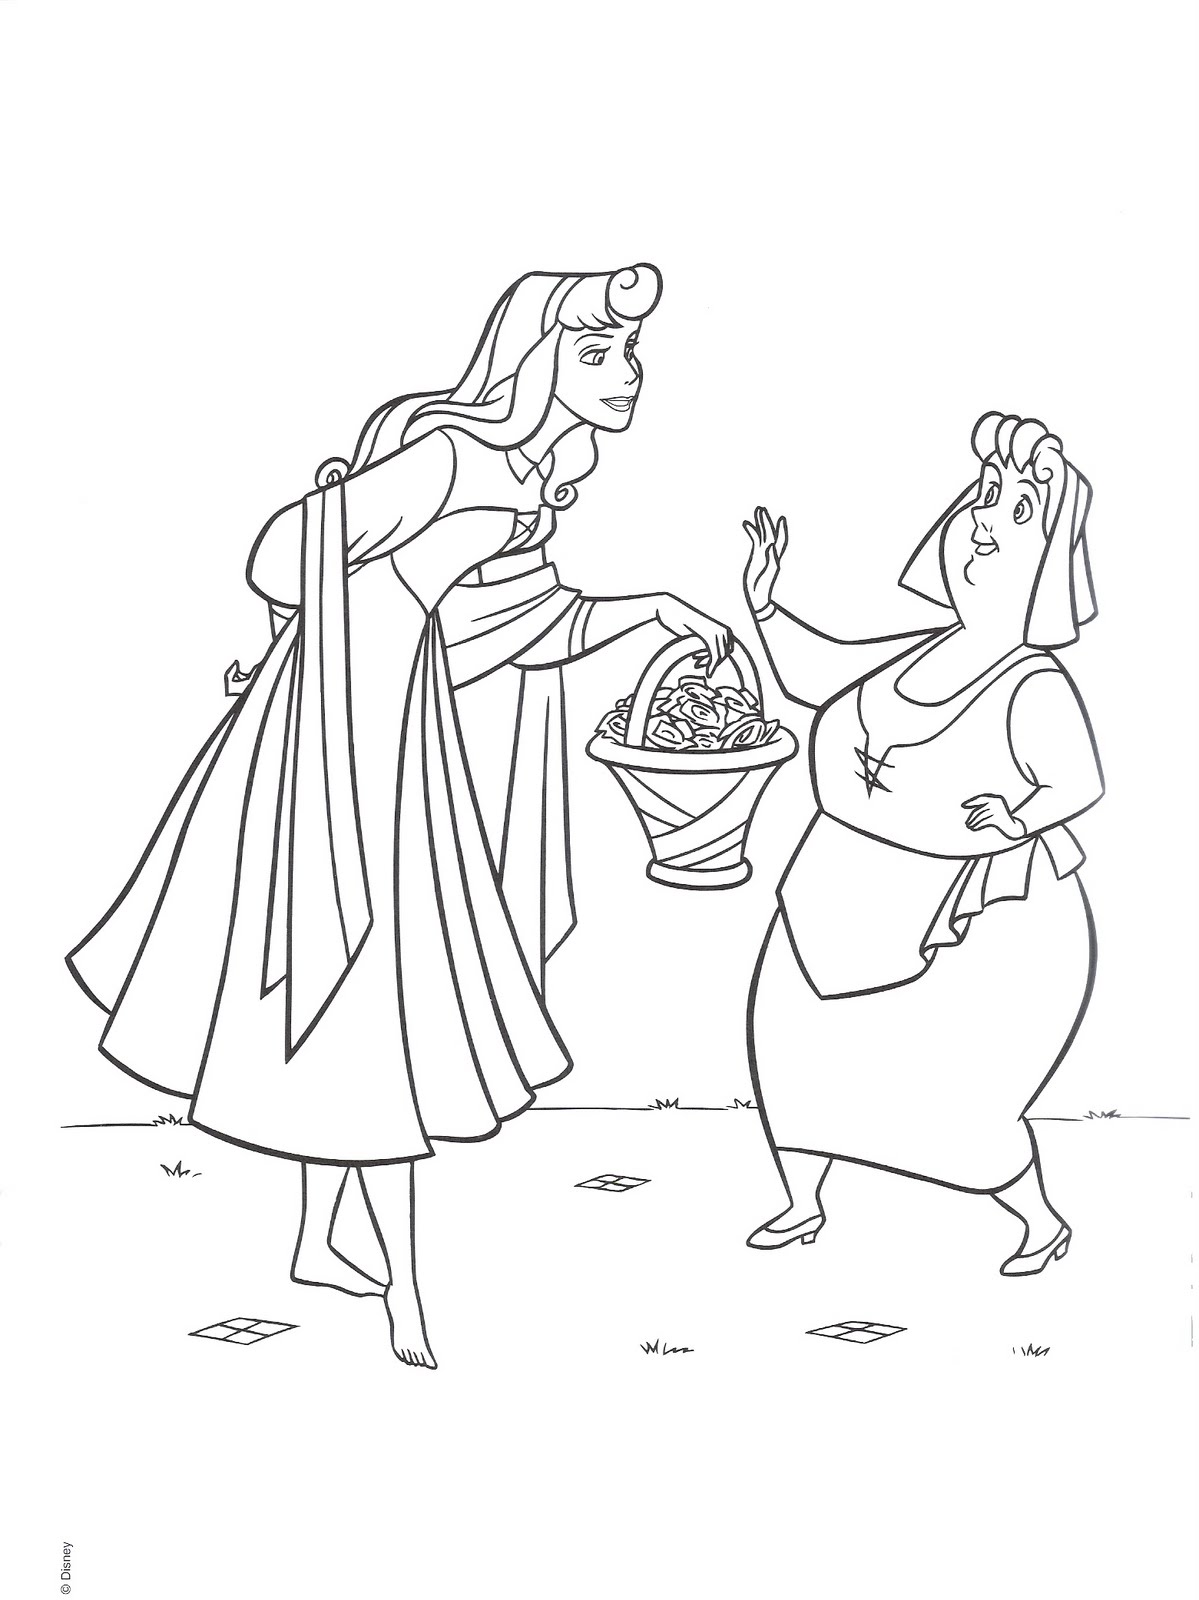 21+ bunny coloring pages for adults Princess coloring pages 2021: best, cool, funny